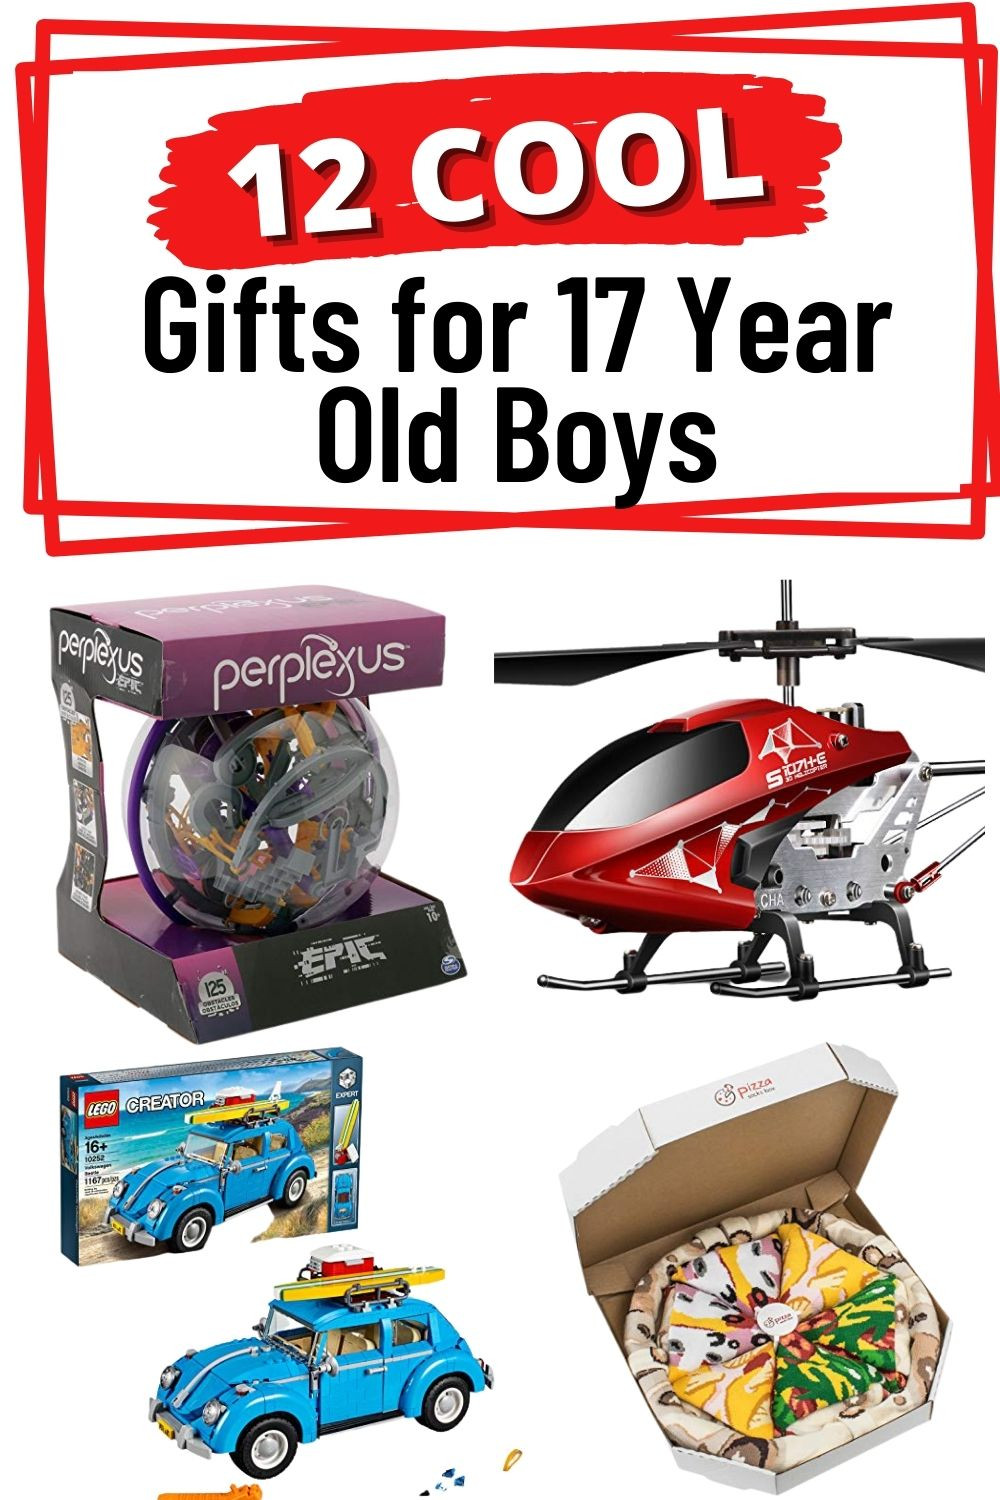 Cool Gift Ideas For Boys
 12 Super Cool Gift Ideas for 17 Year Old Boys